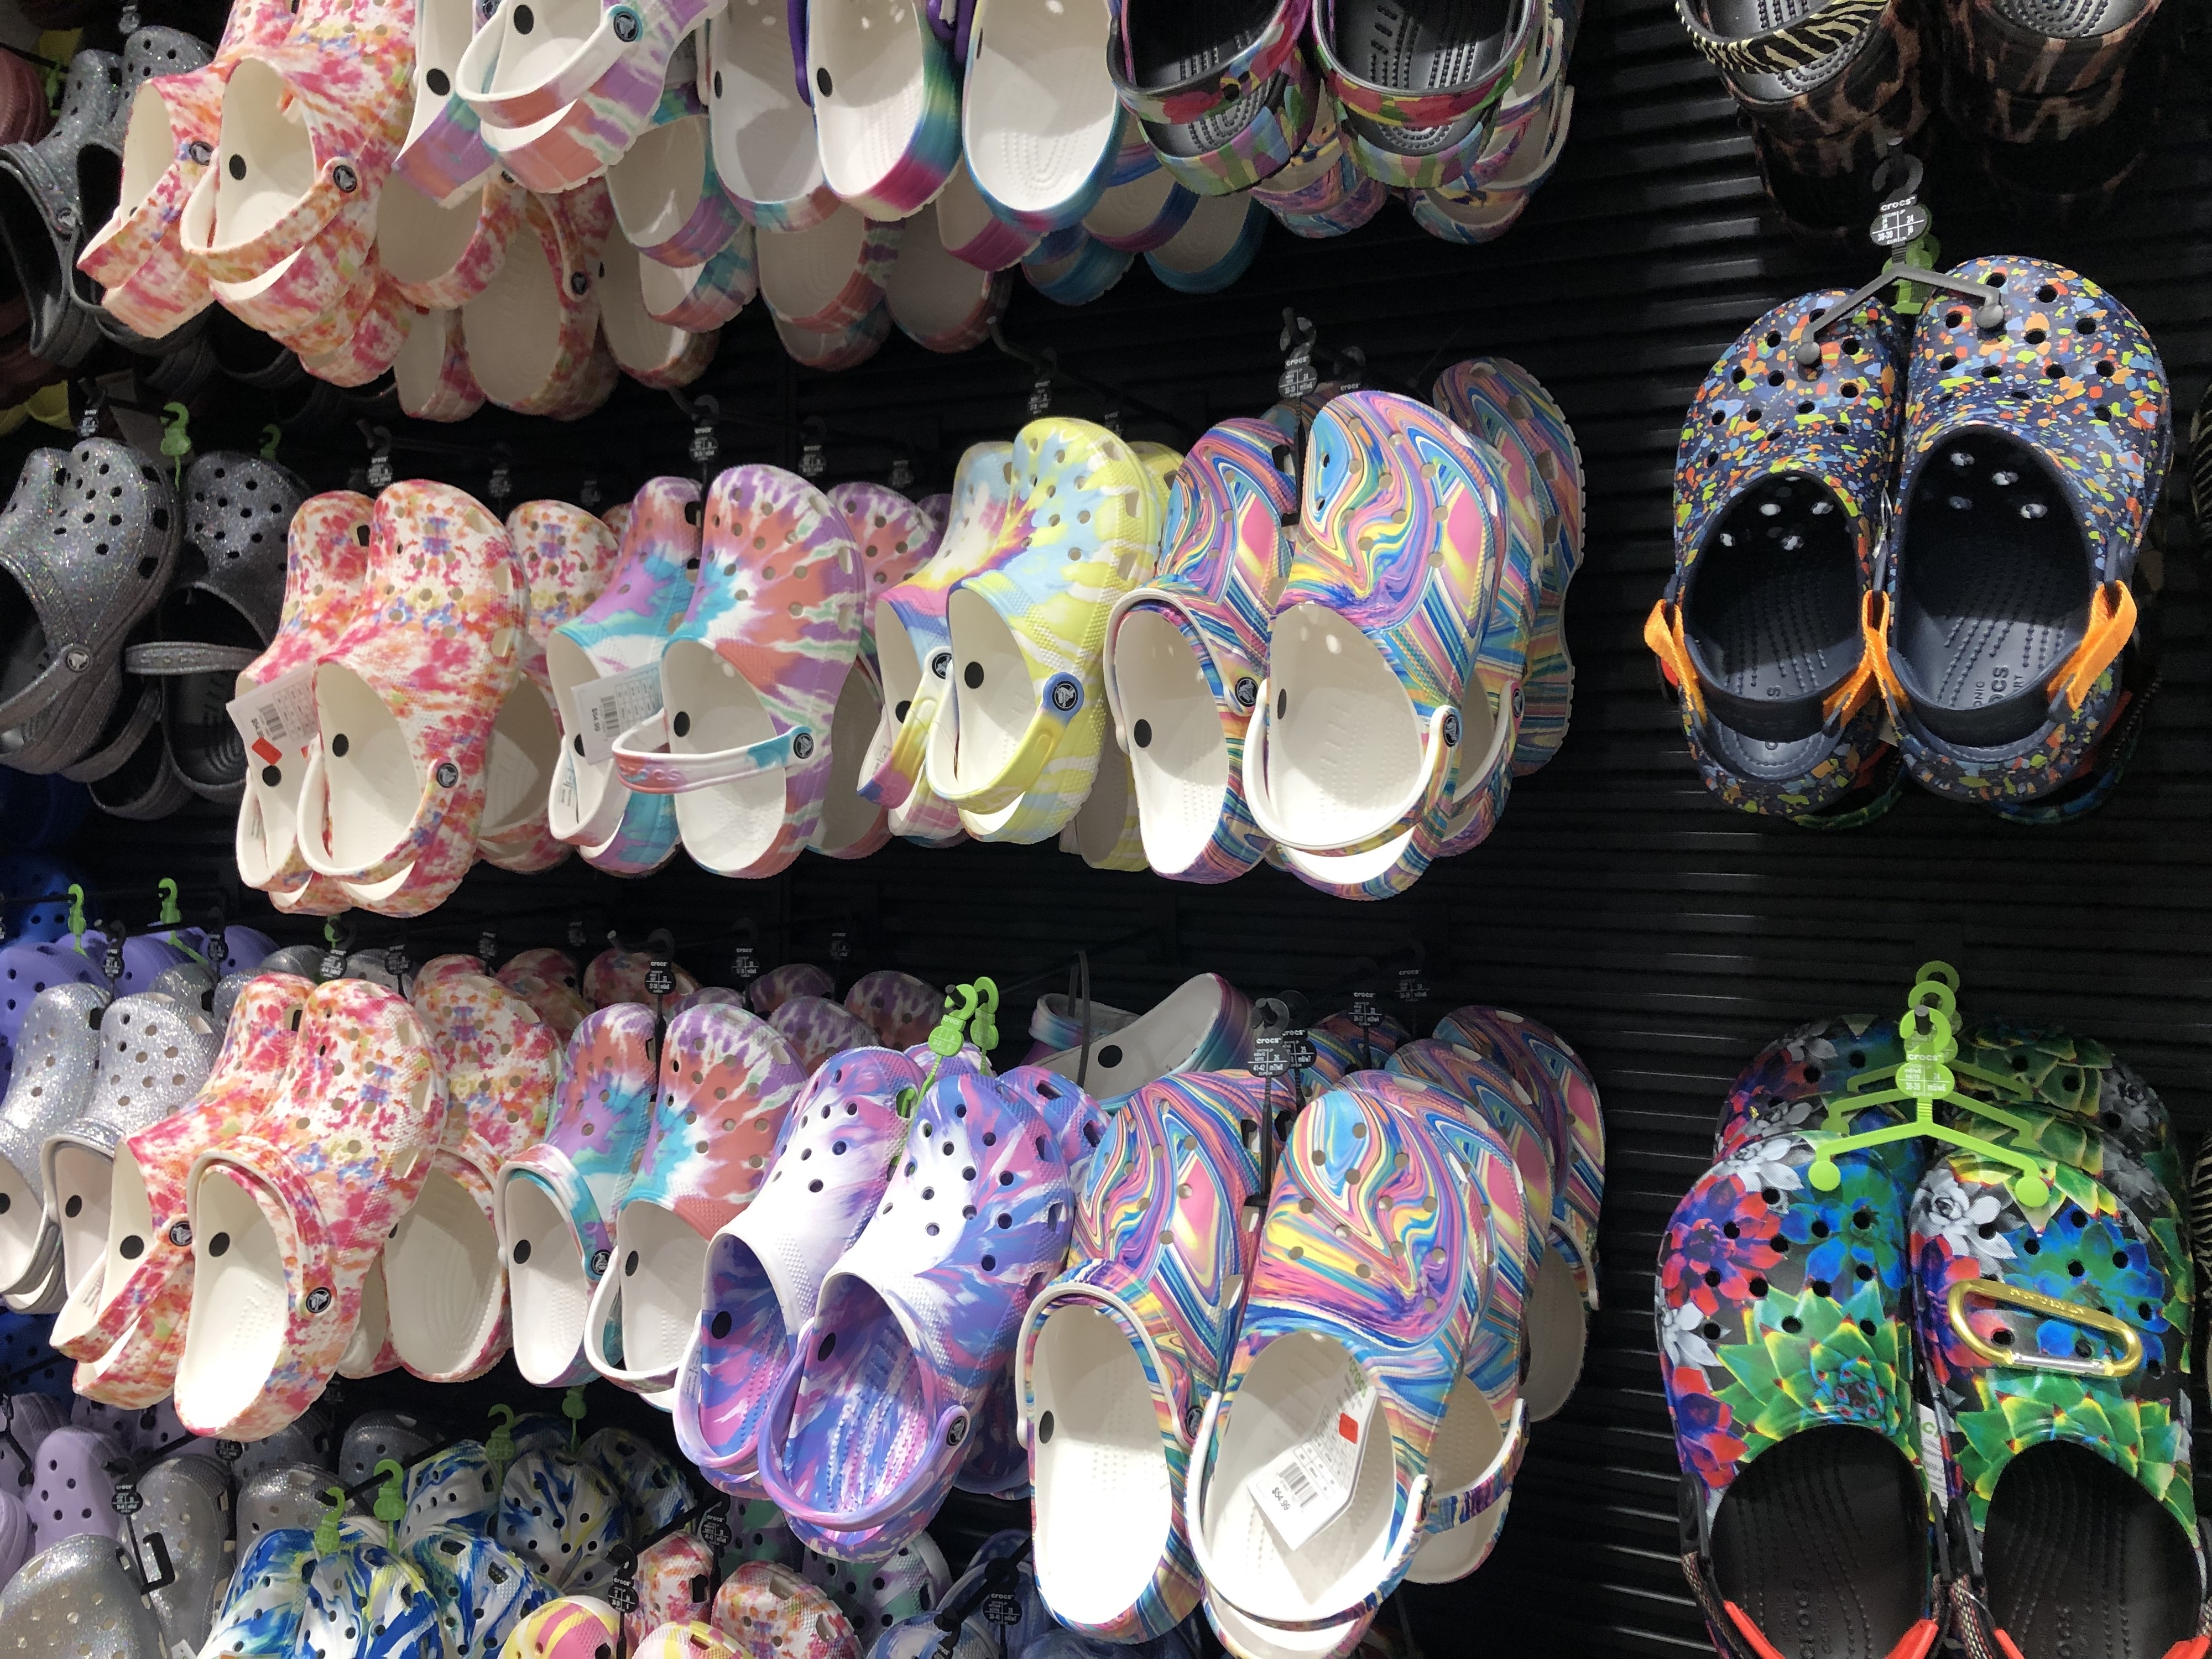 An assortment of various styles of Crocs footwear displayed on a retail store rack